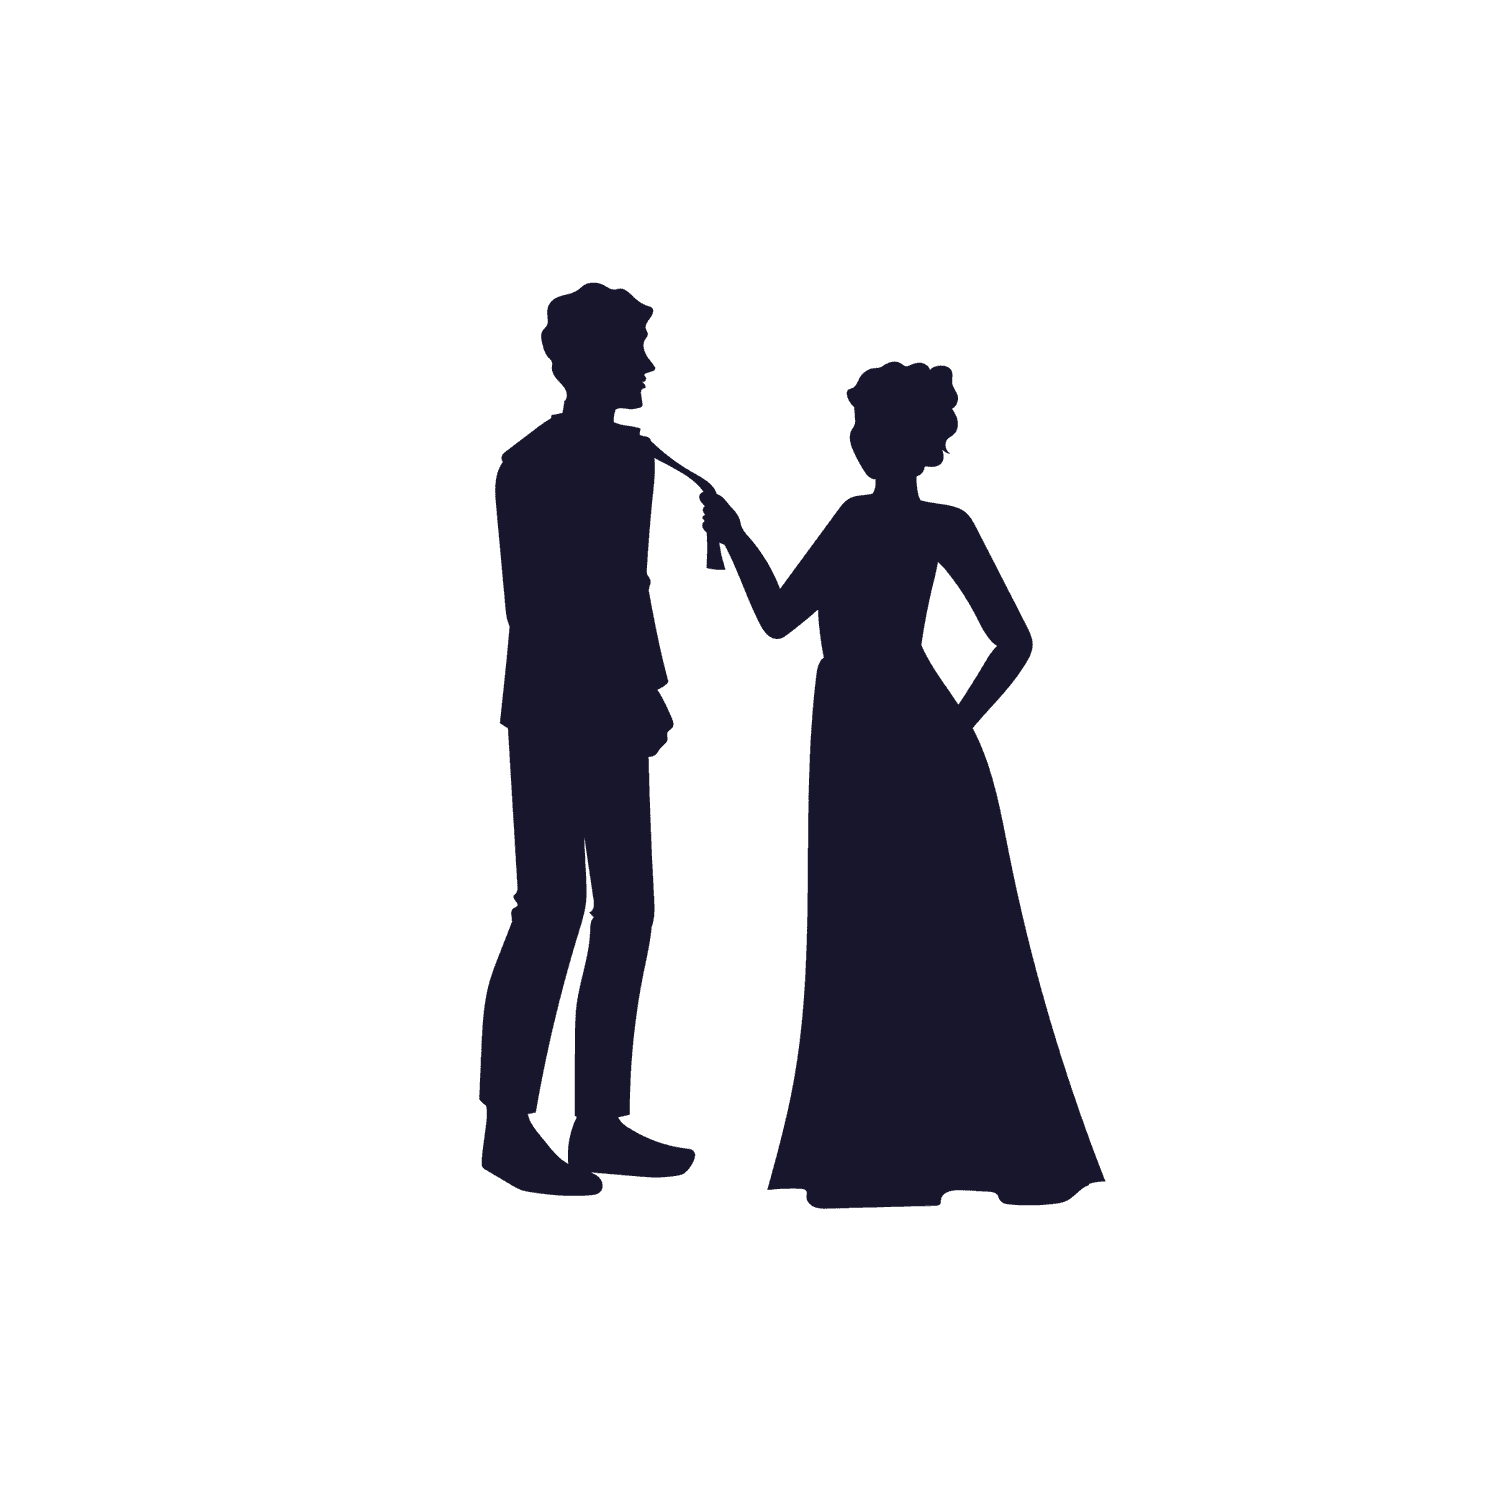 elegant black and white silhouette of a dancing couple